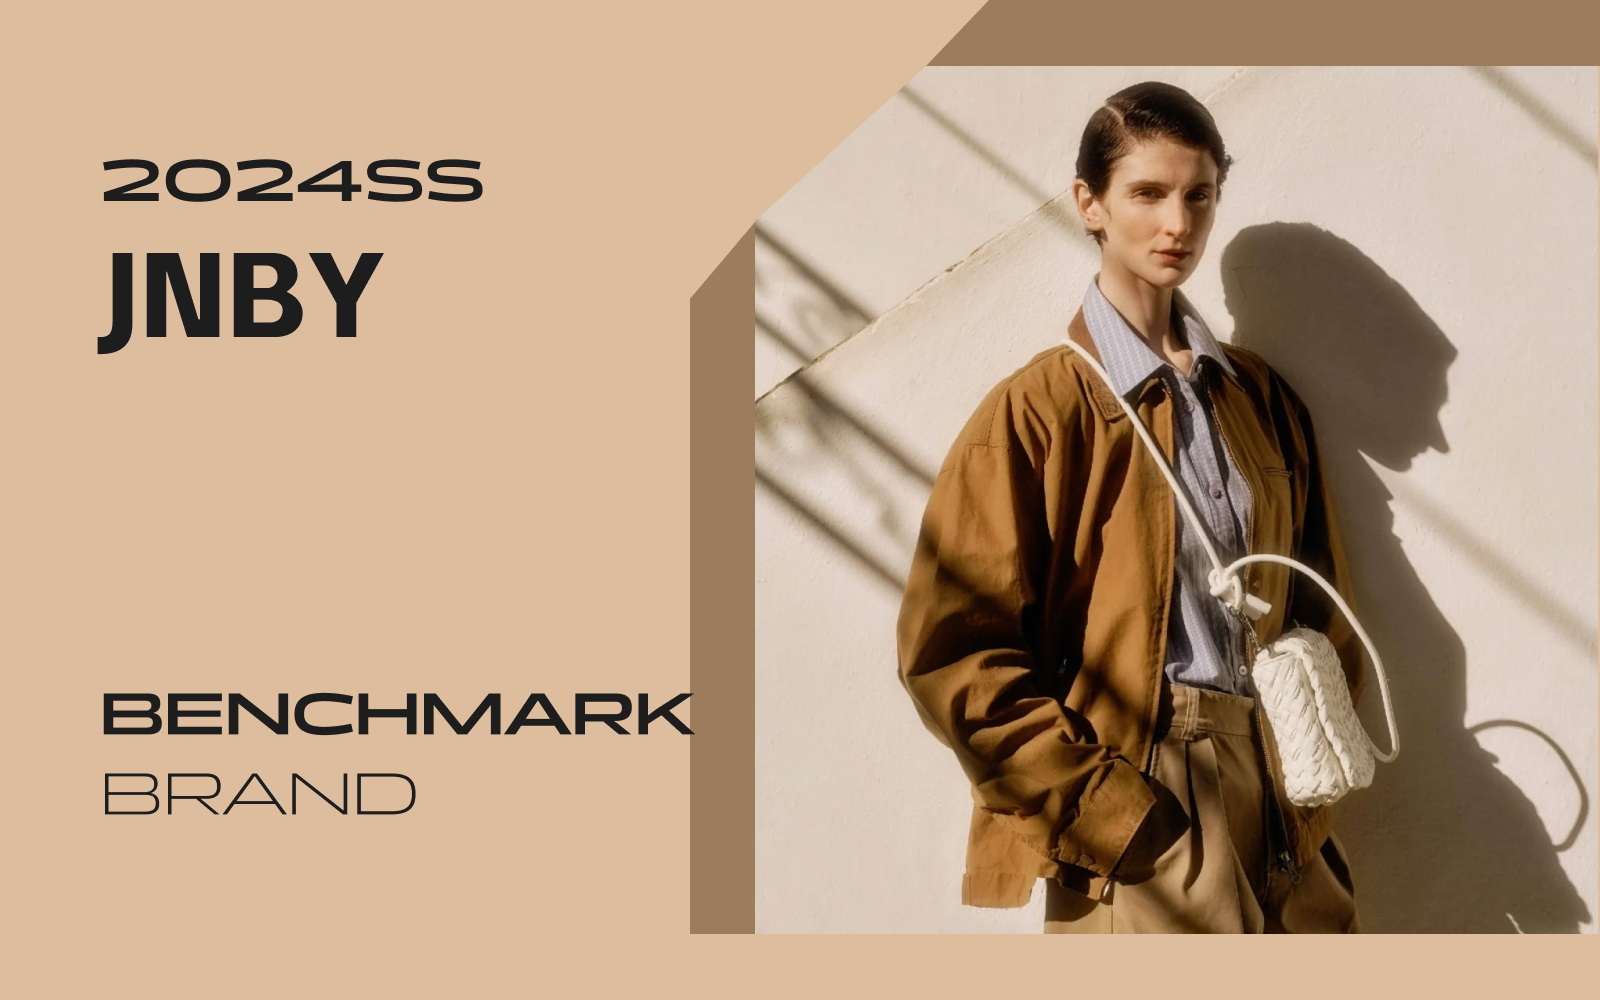 Wind Chaser -- The Analysis of JNBY The Benchmark Womenswear Brand